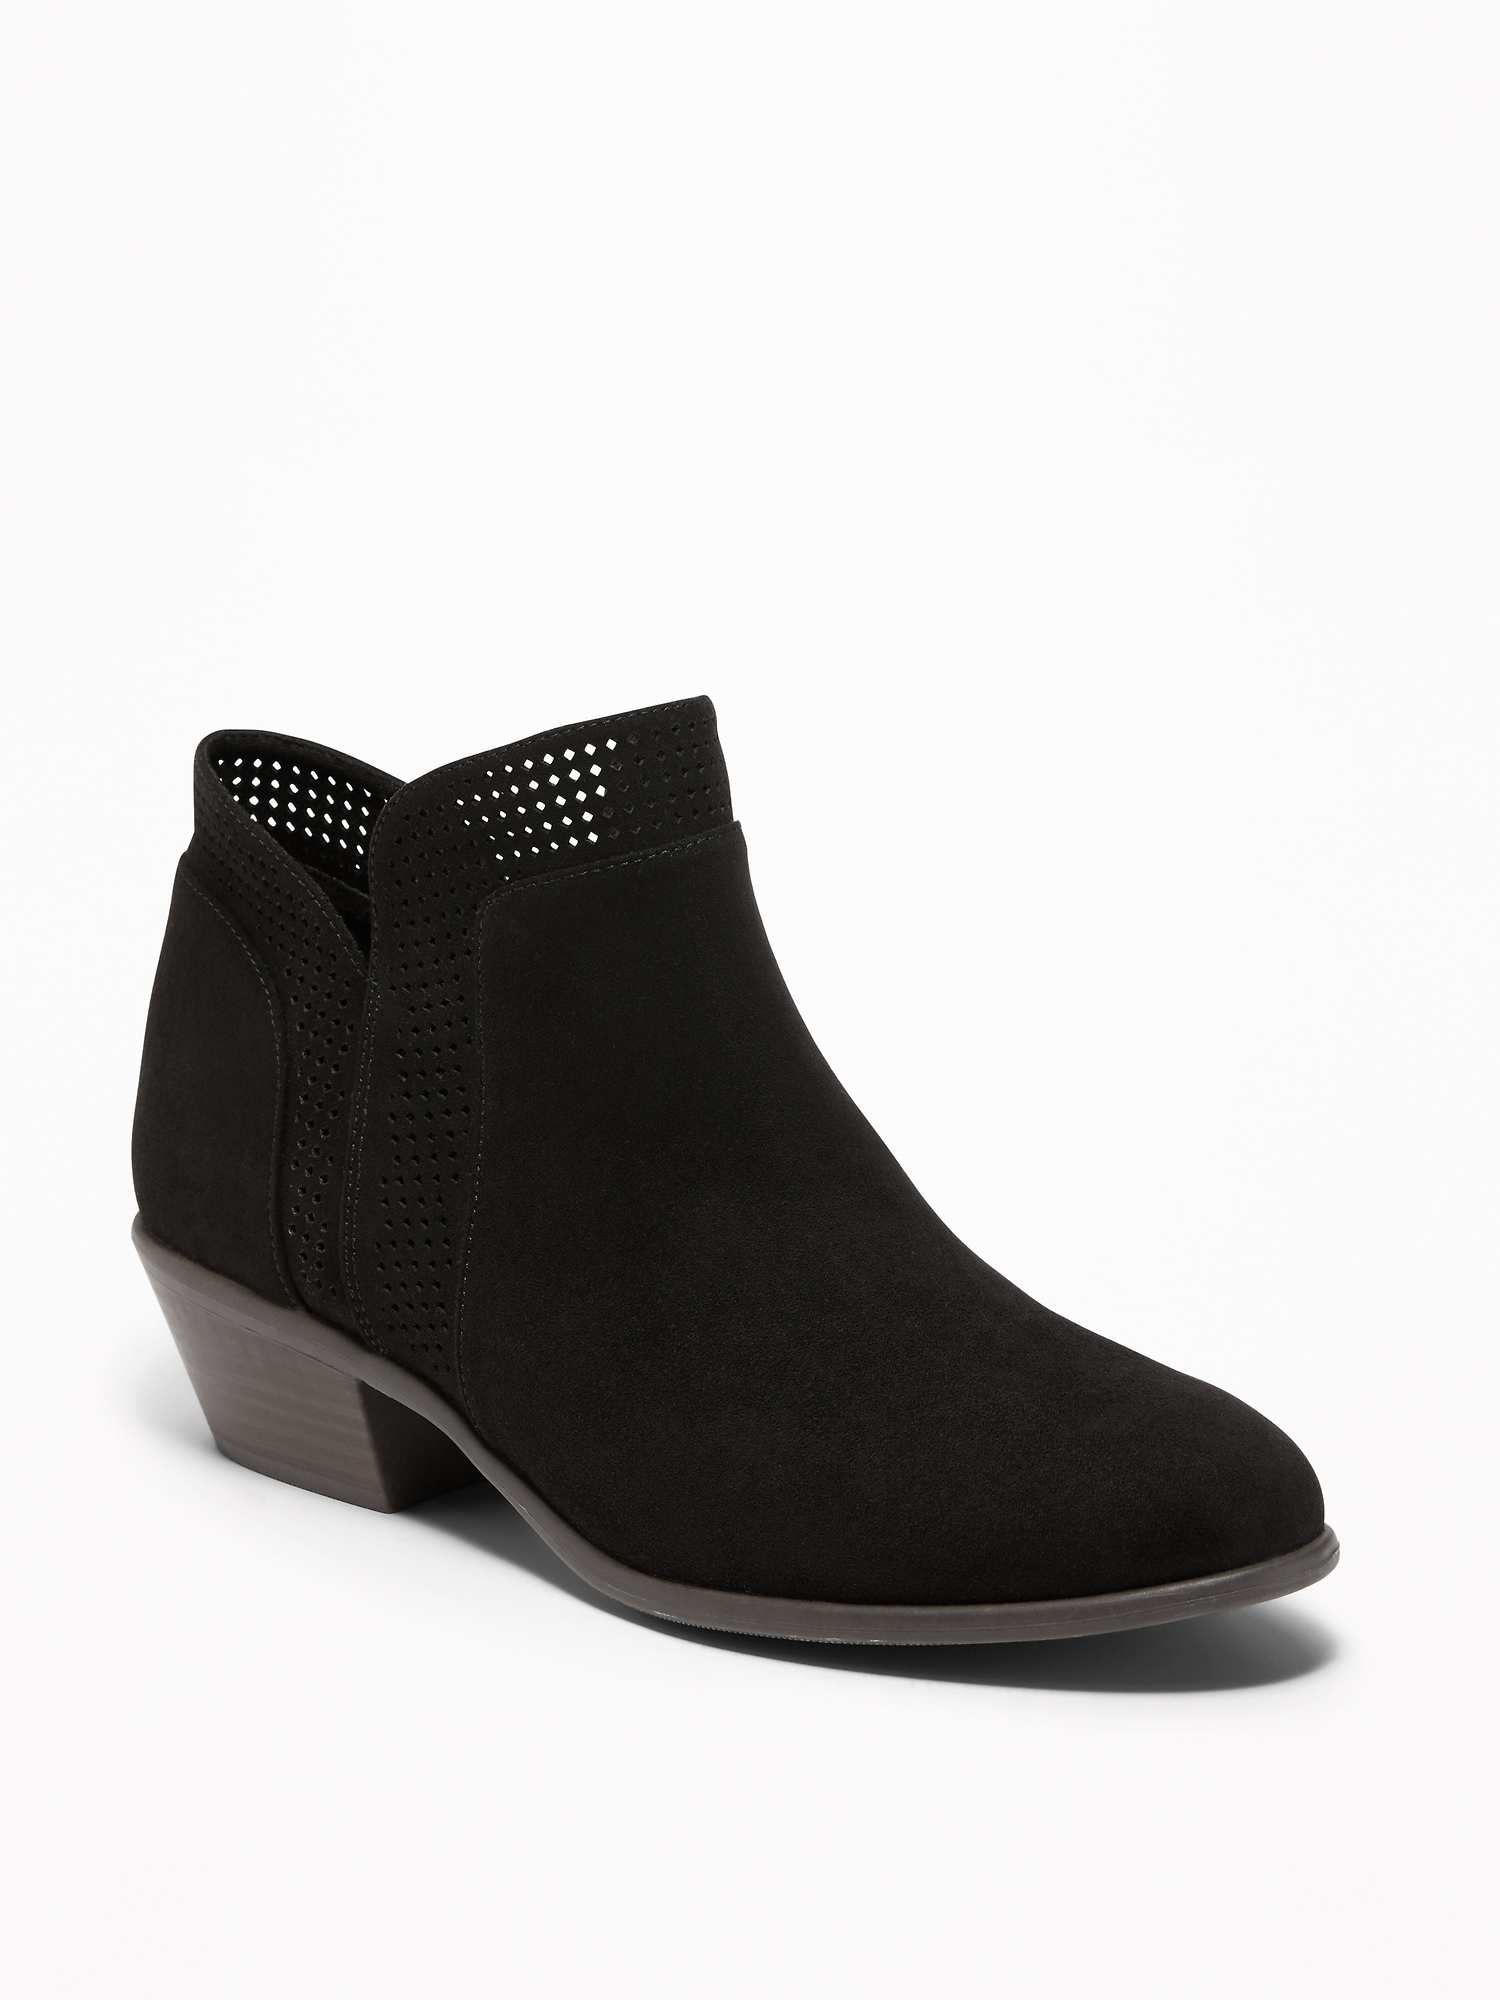 Perforated Faux-Suede Ankle Boots for Women | Old Navy